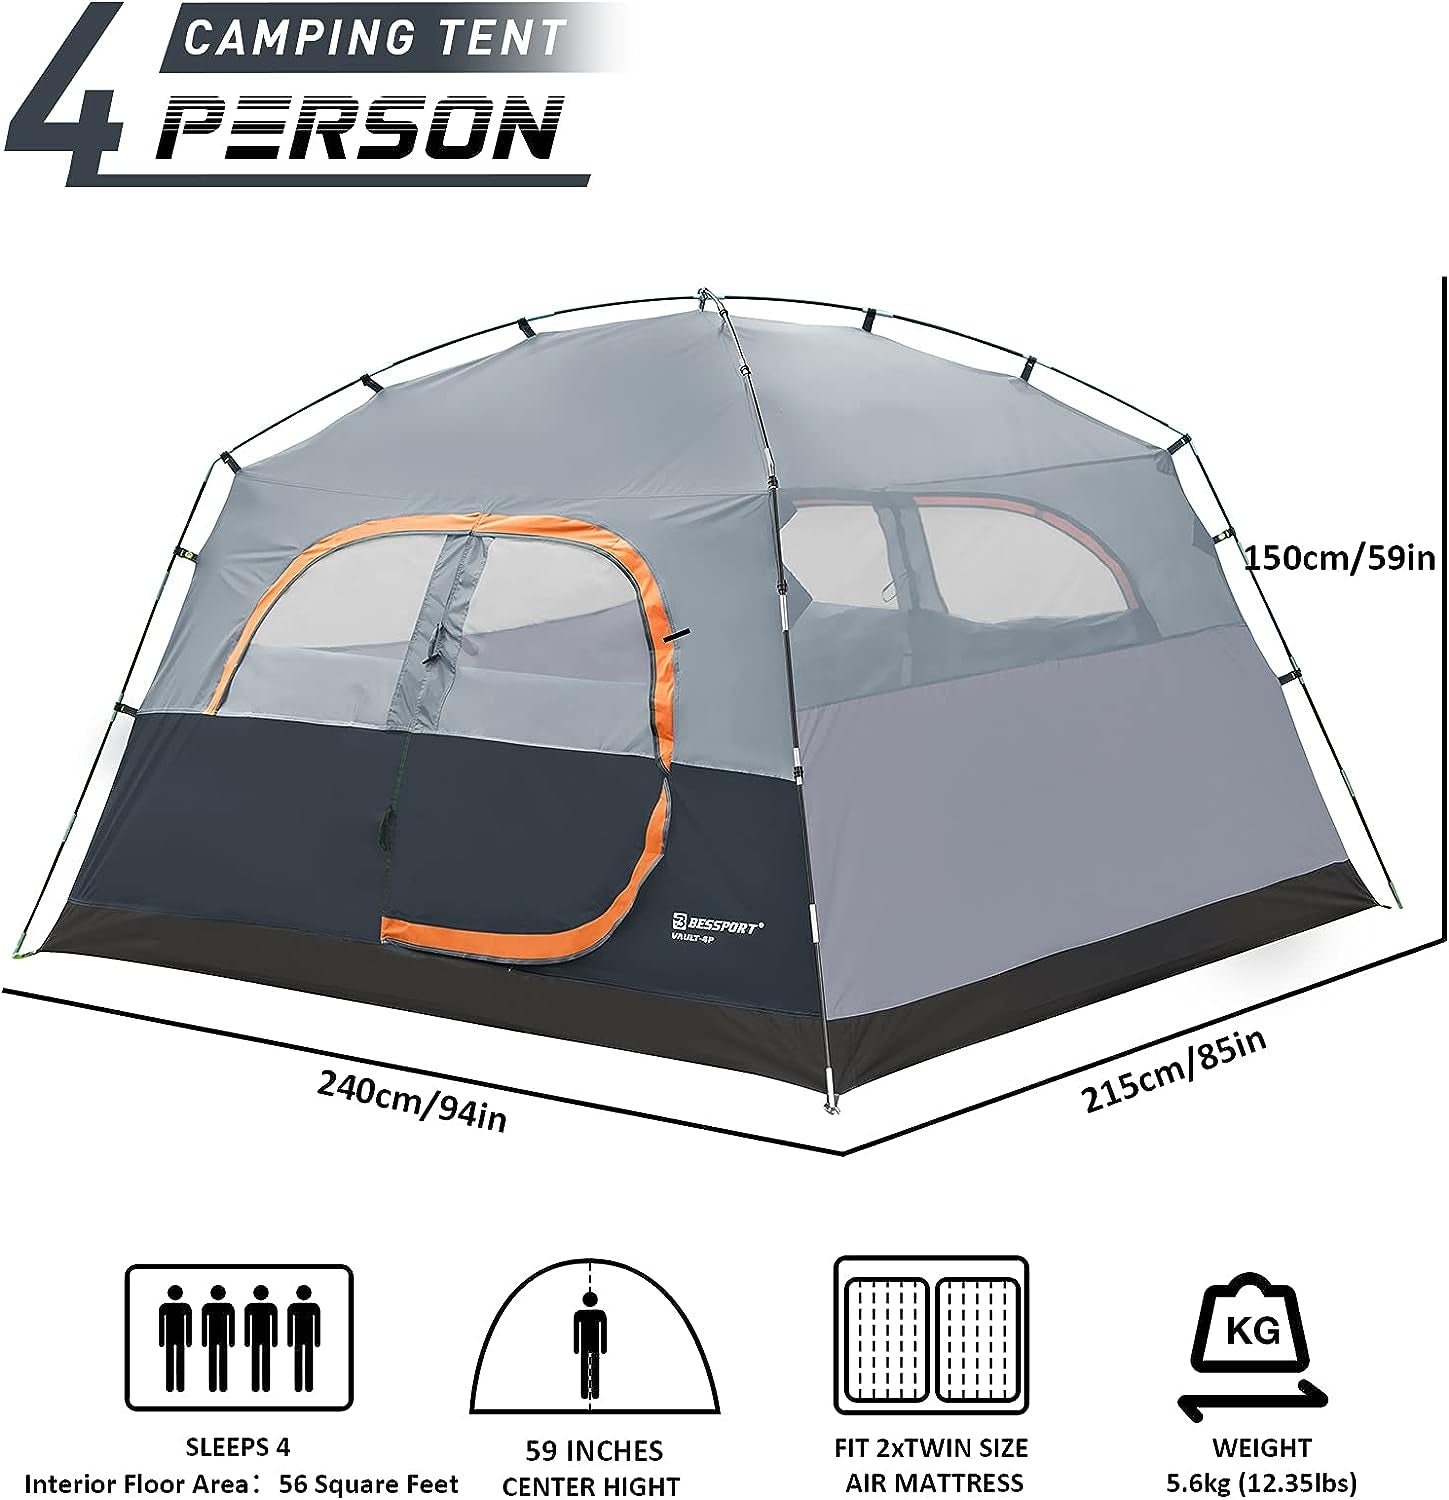 Tent 4 Person Camping Tent,Waterproof & Windproof Backpacking Tent,Easy Setup,For 3-4 Seasons Lightweight Tent,Great for Outdoor, Mountaineering and Glamping